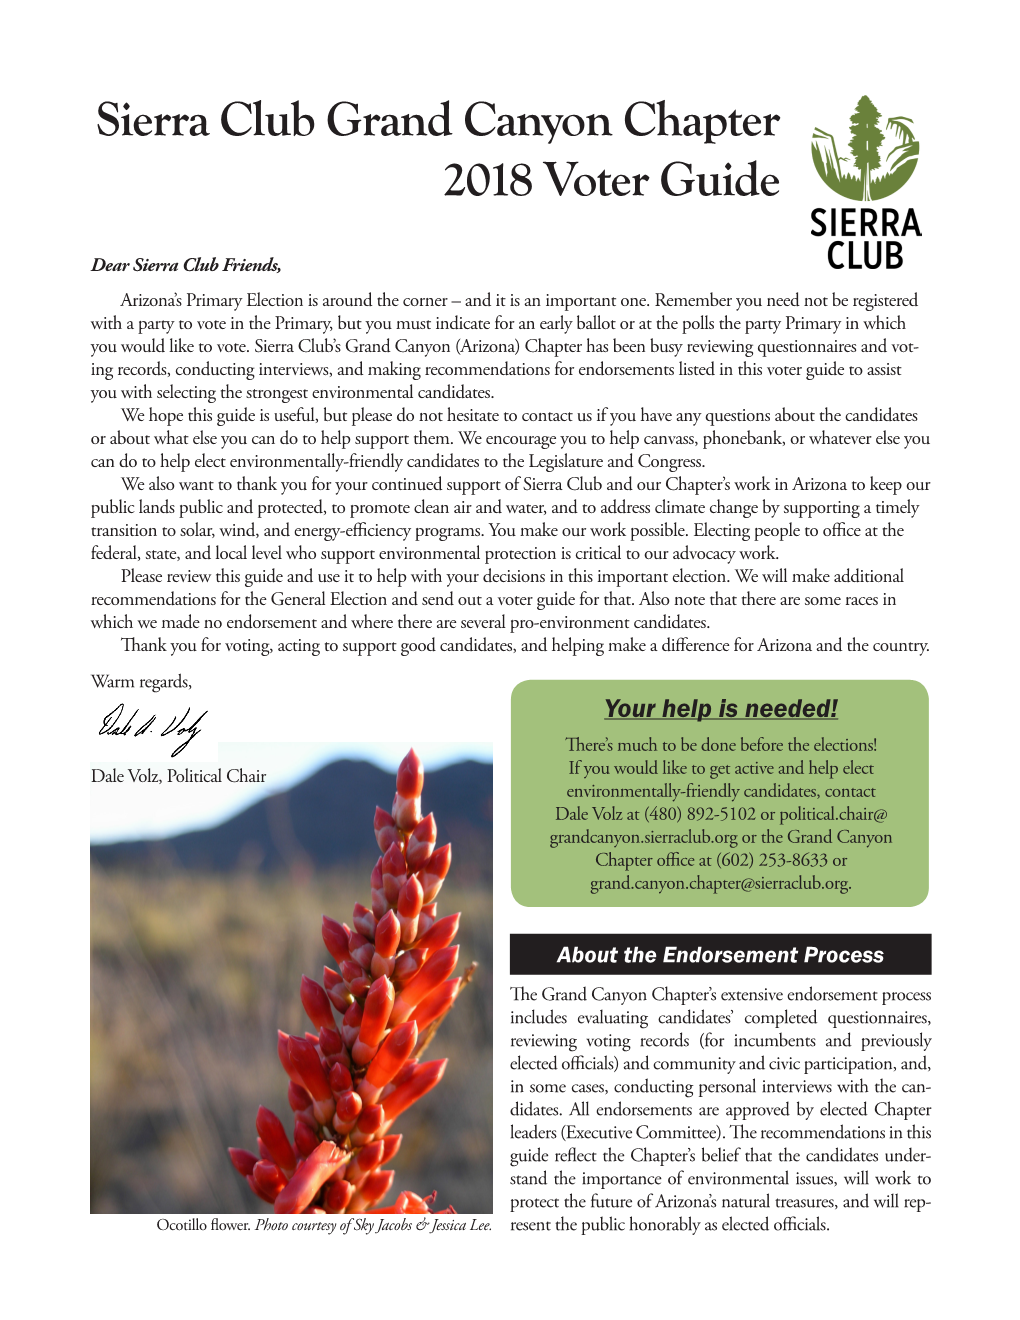 Sierra Club Grand Canyon Chapter 2018 Voter Guide